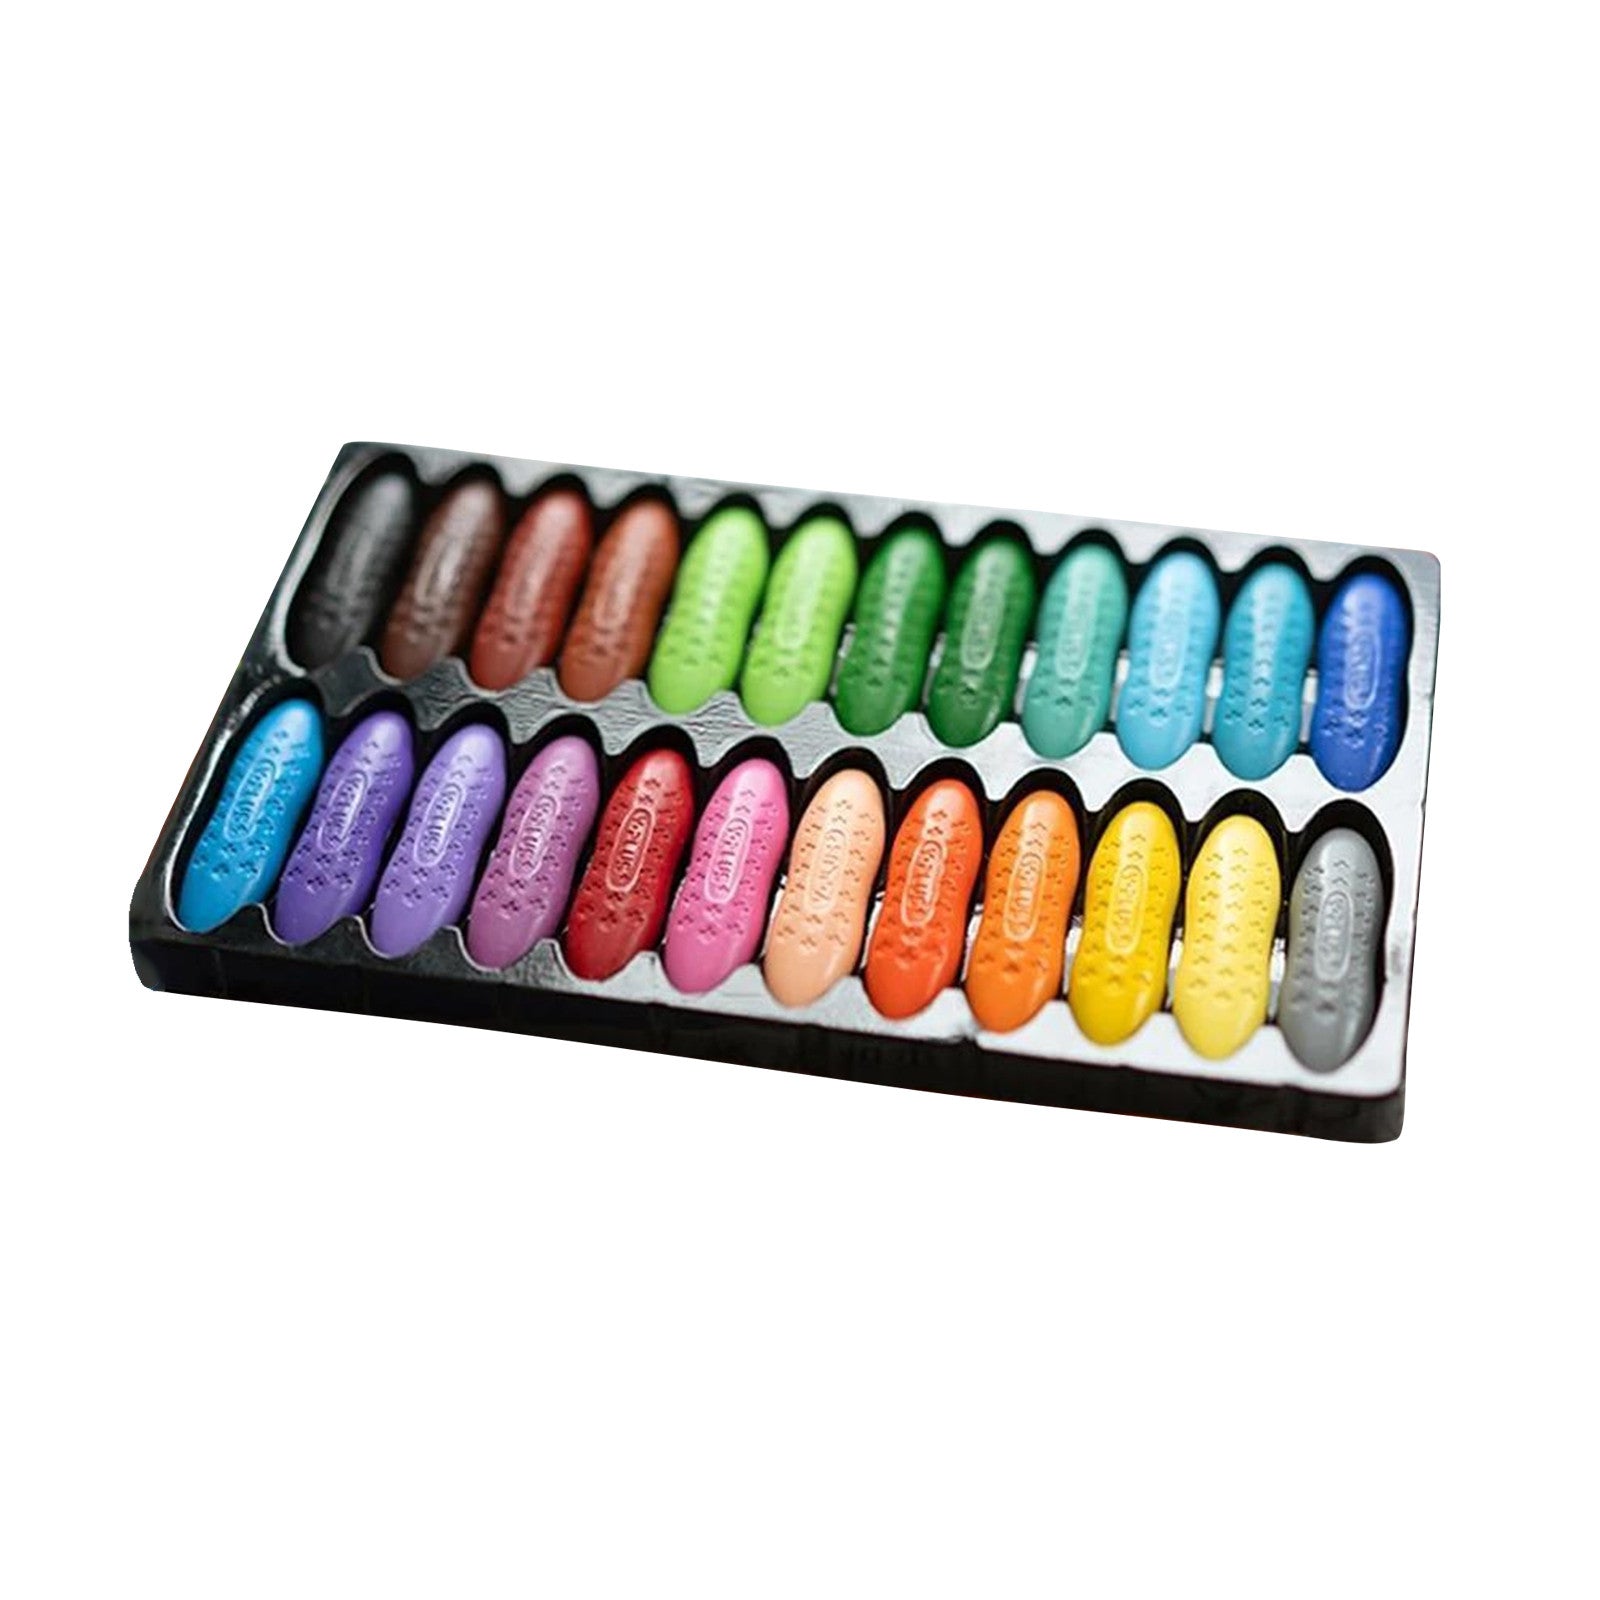 Full 24 Color Washable Peanut Crayons - Solutiverse